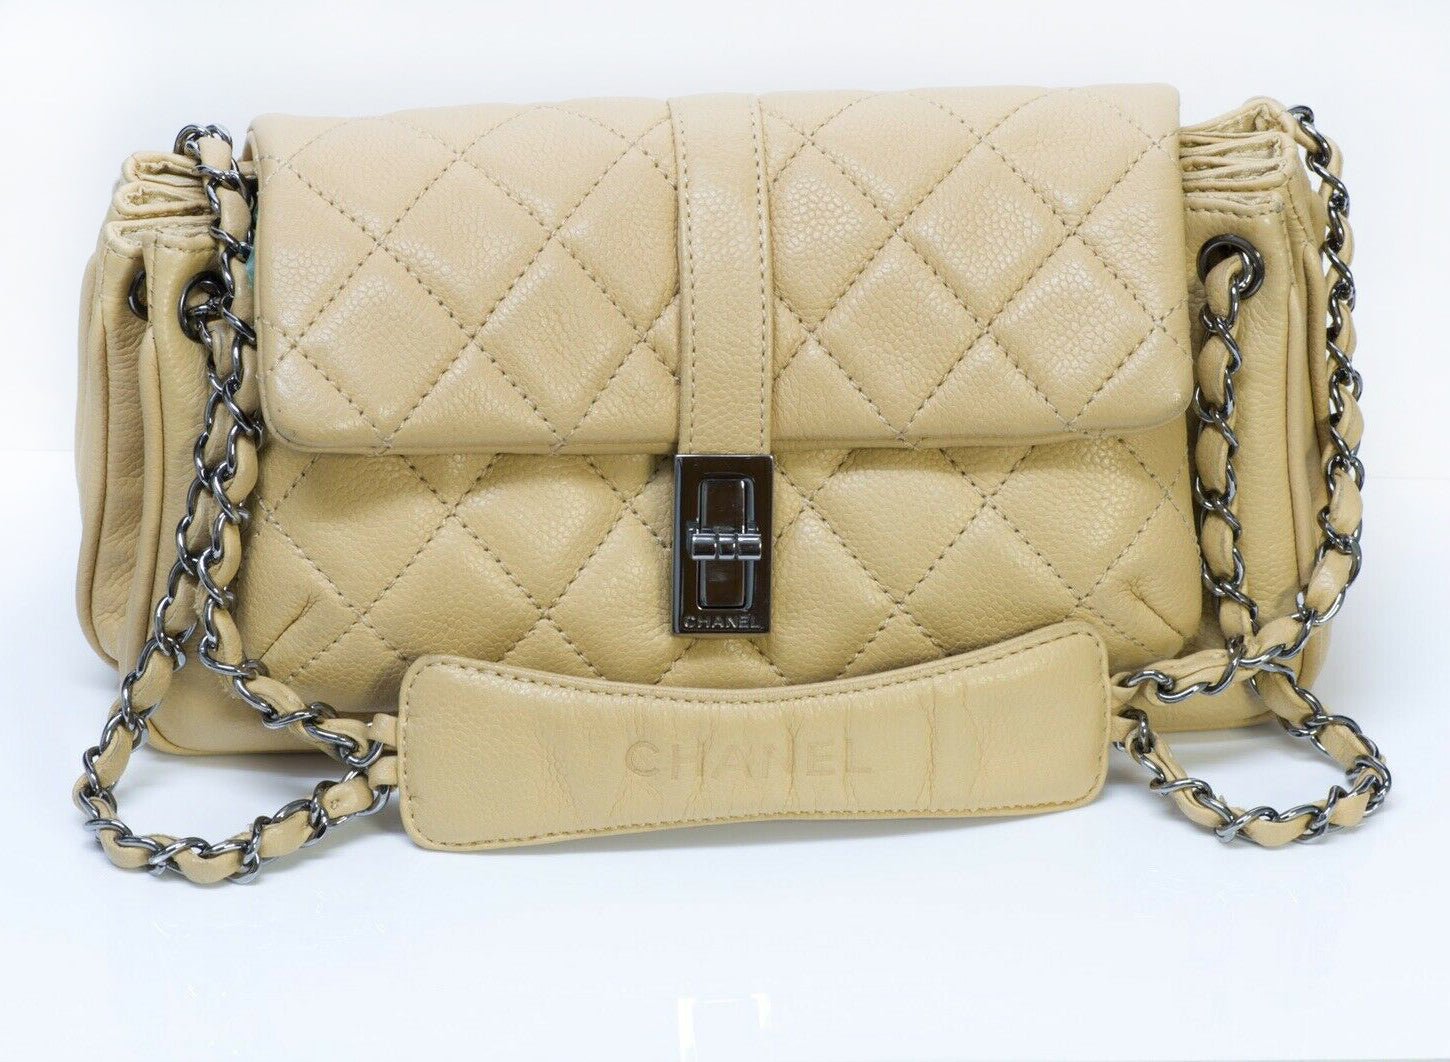 CHANEL CC Beige Quilted Leather Mademoiselle Lock Small Shoulder Bag